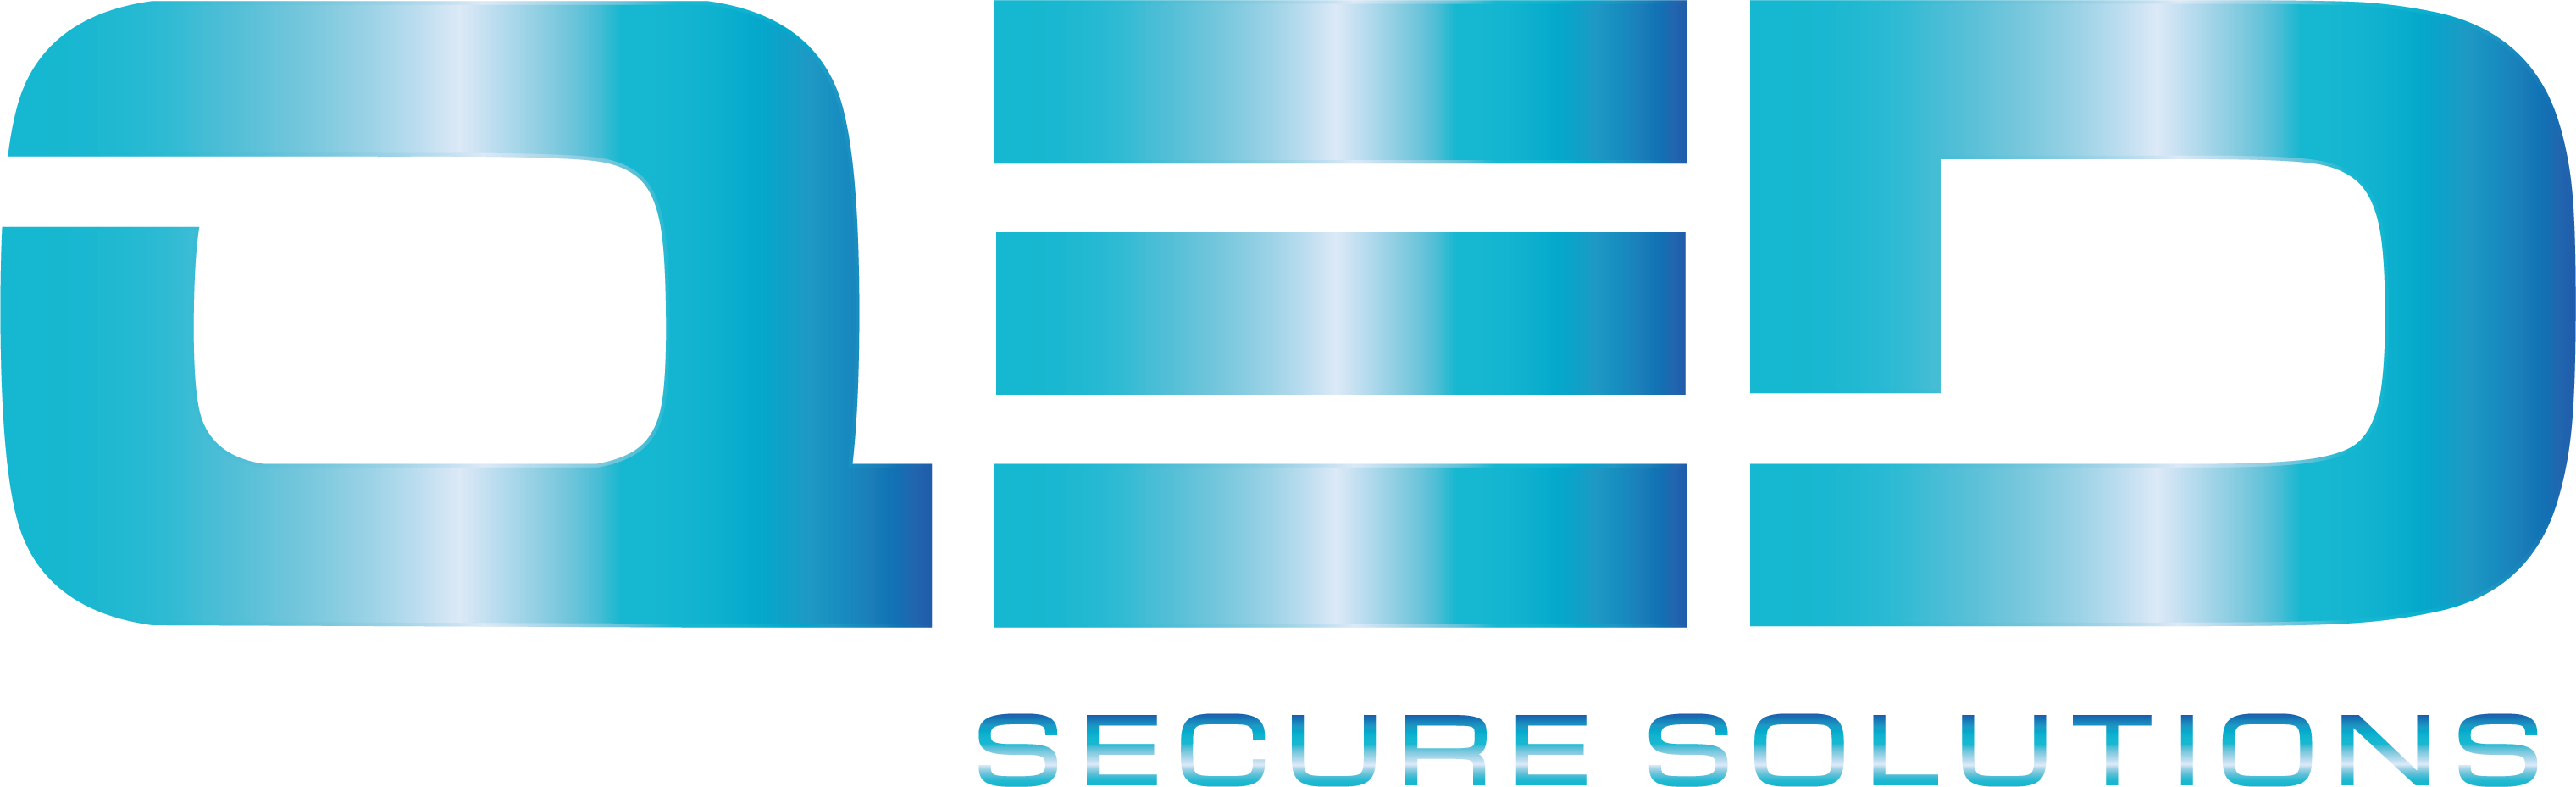 QED Secure Solutions